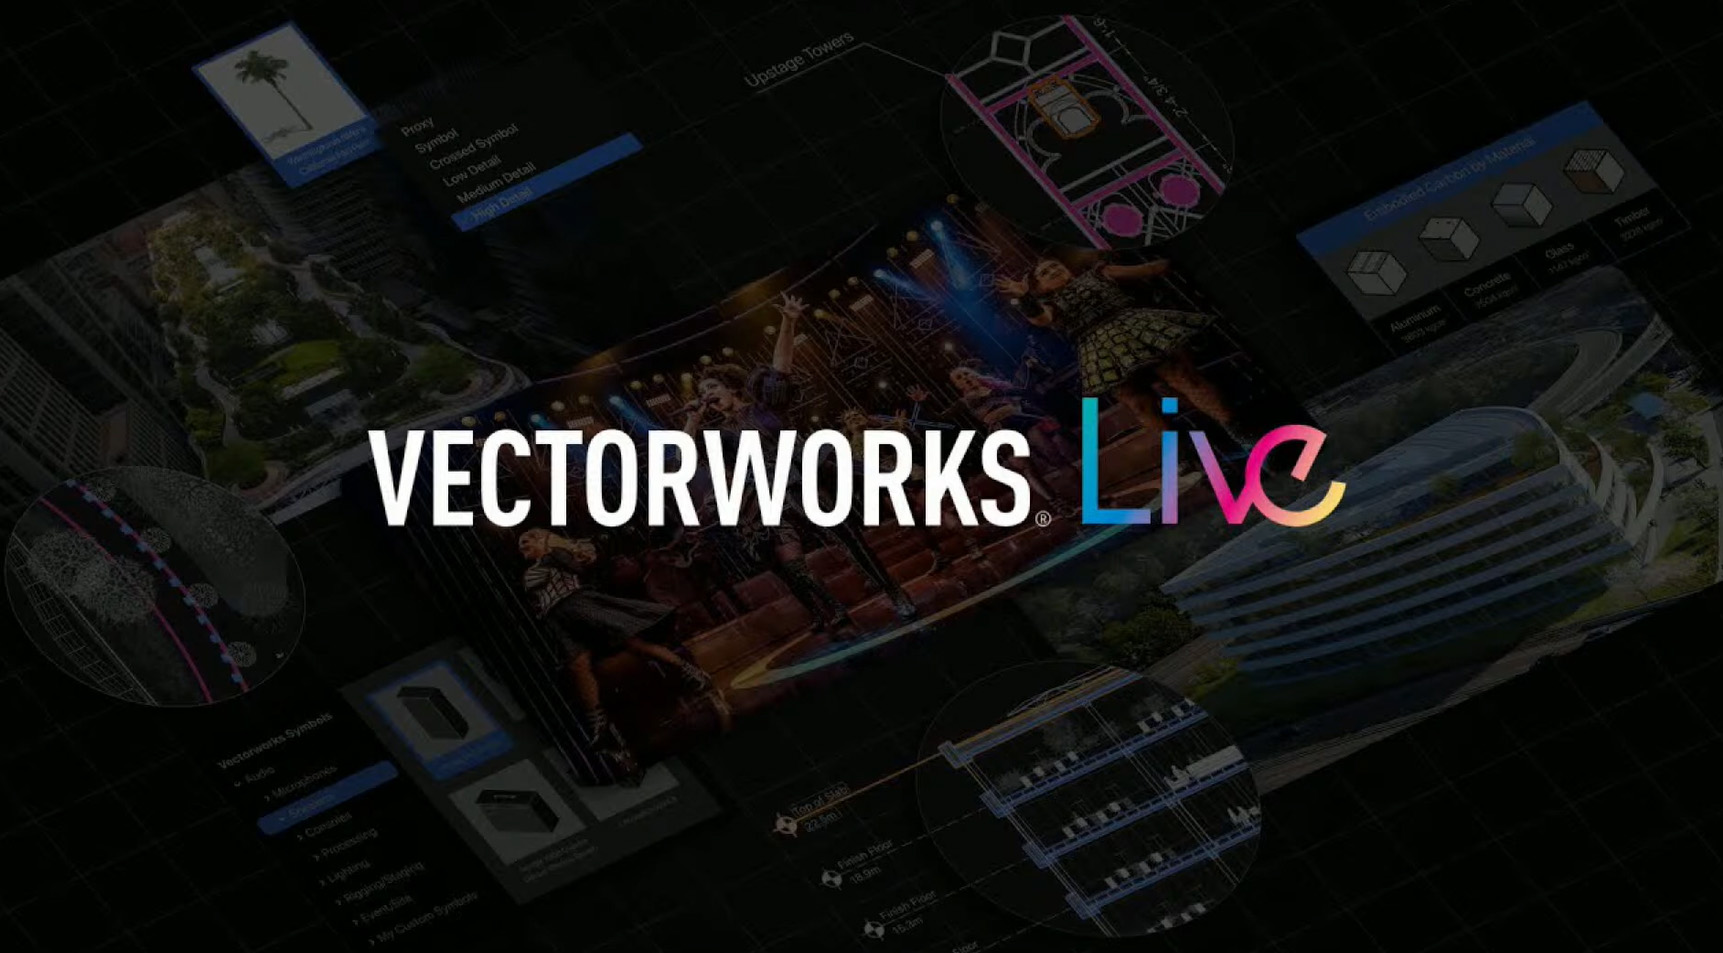 Vectorworks 2023の新機能が期待できそう（A＆A Vectorworks Live in 2022 / YOUTUBE）